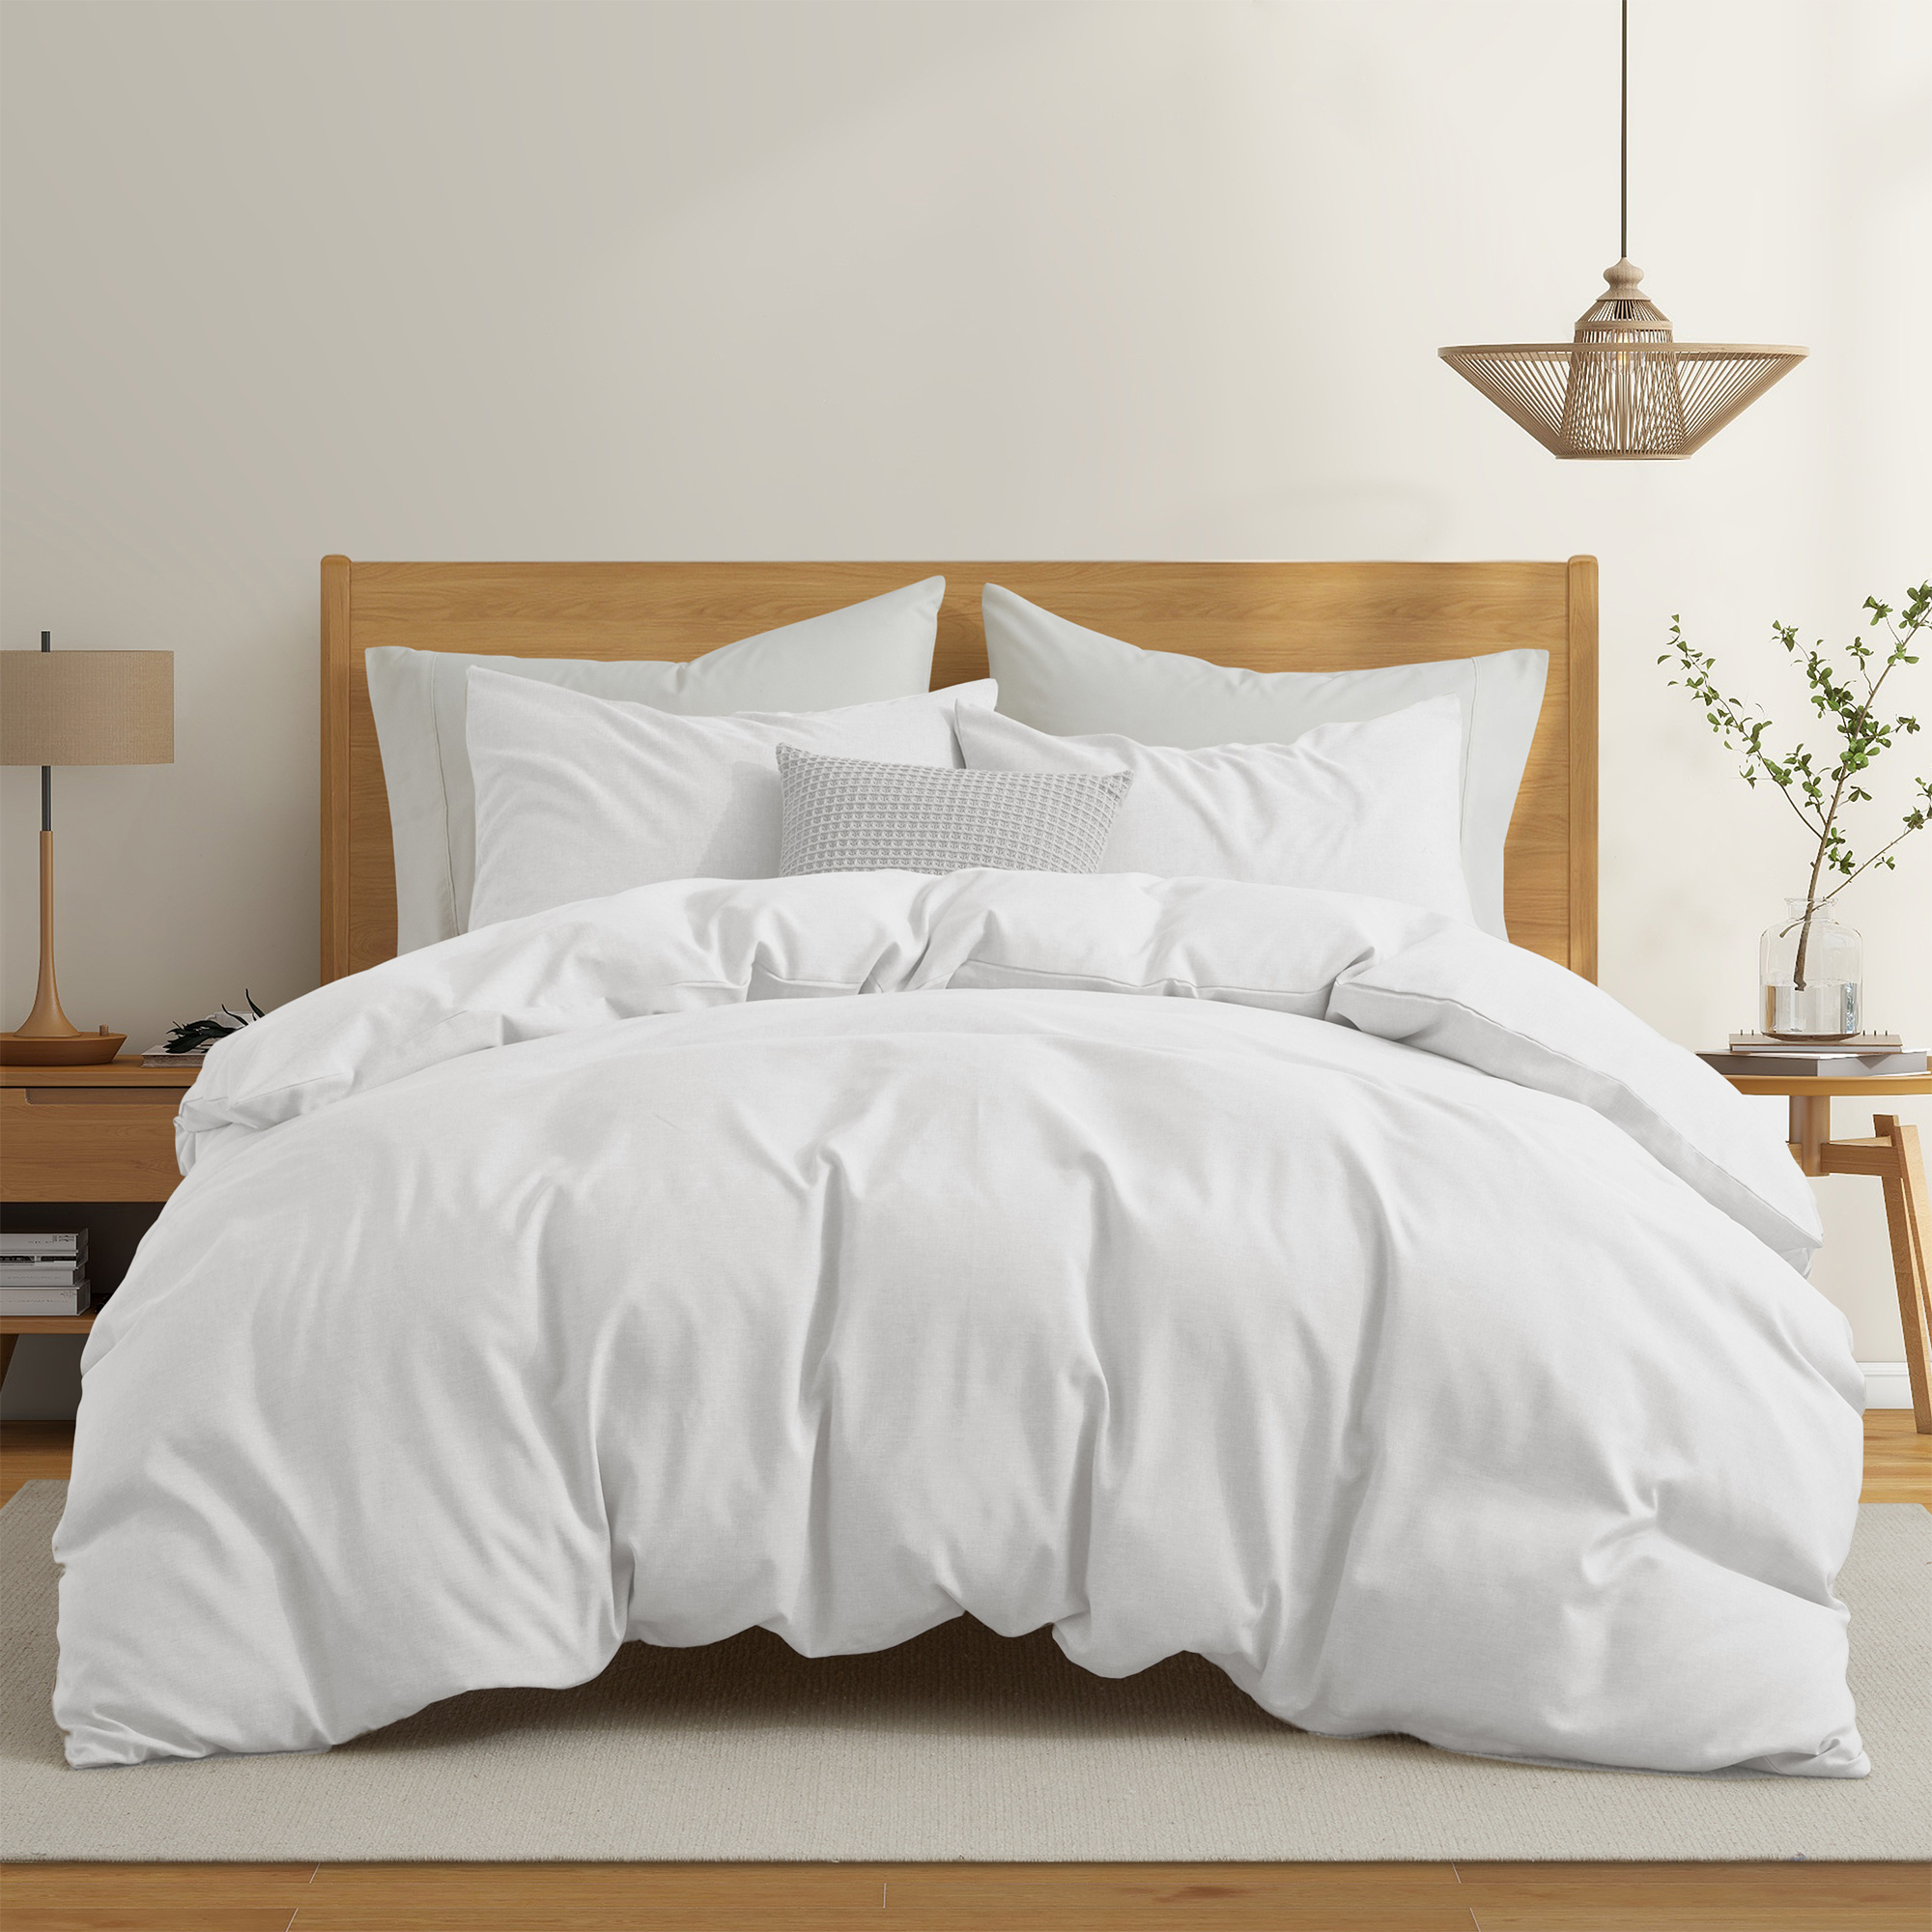 Solid Faux Linen Duvet Cover Set With Shams - Luxurious Comfort - White, Full/Queen-90x90